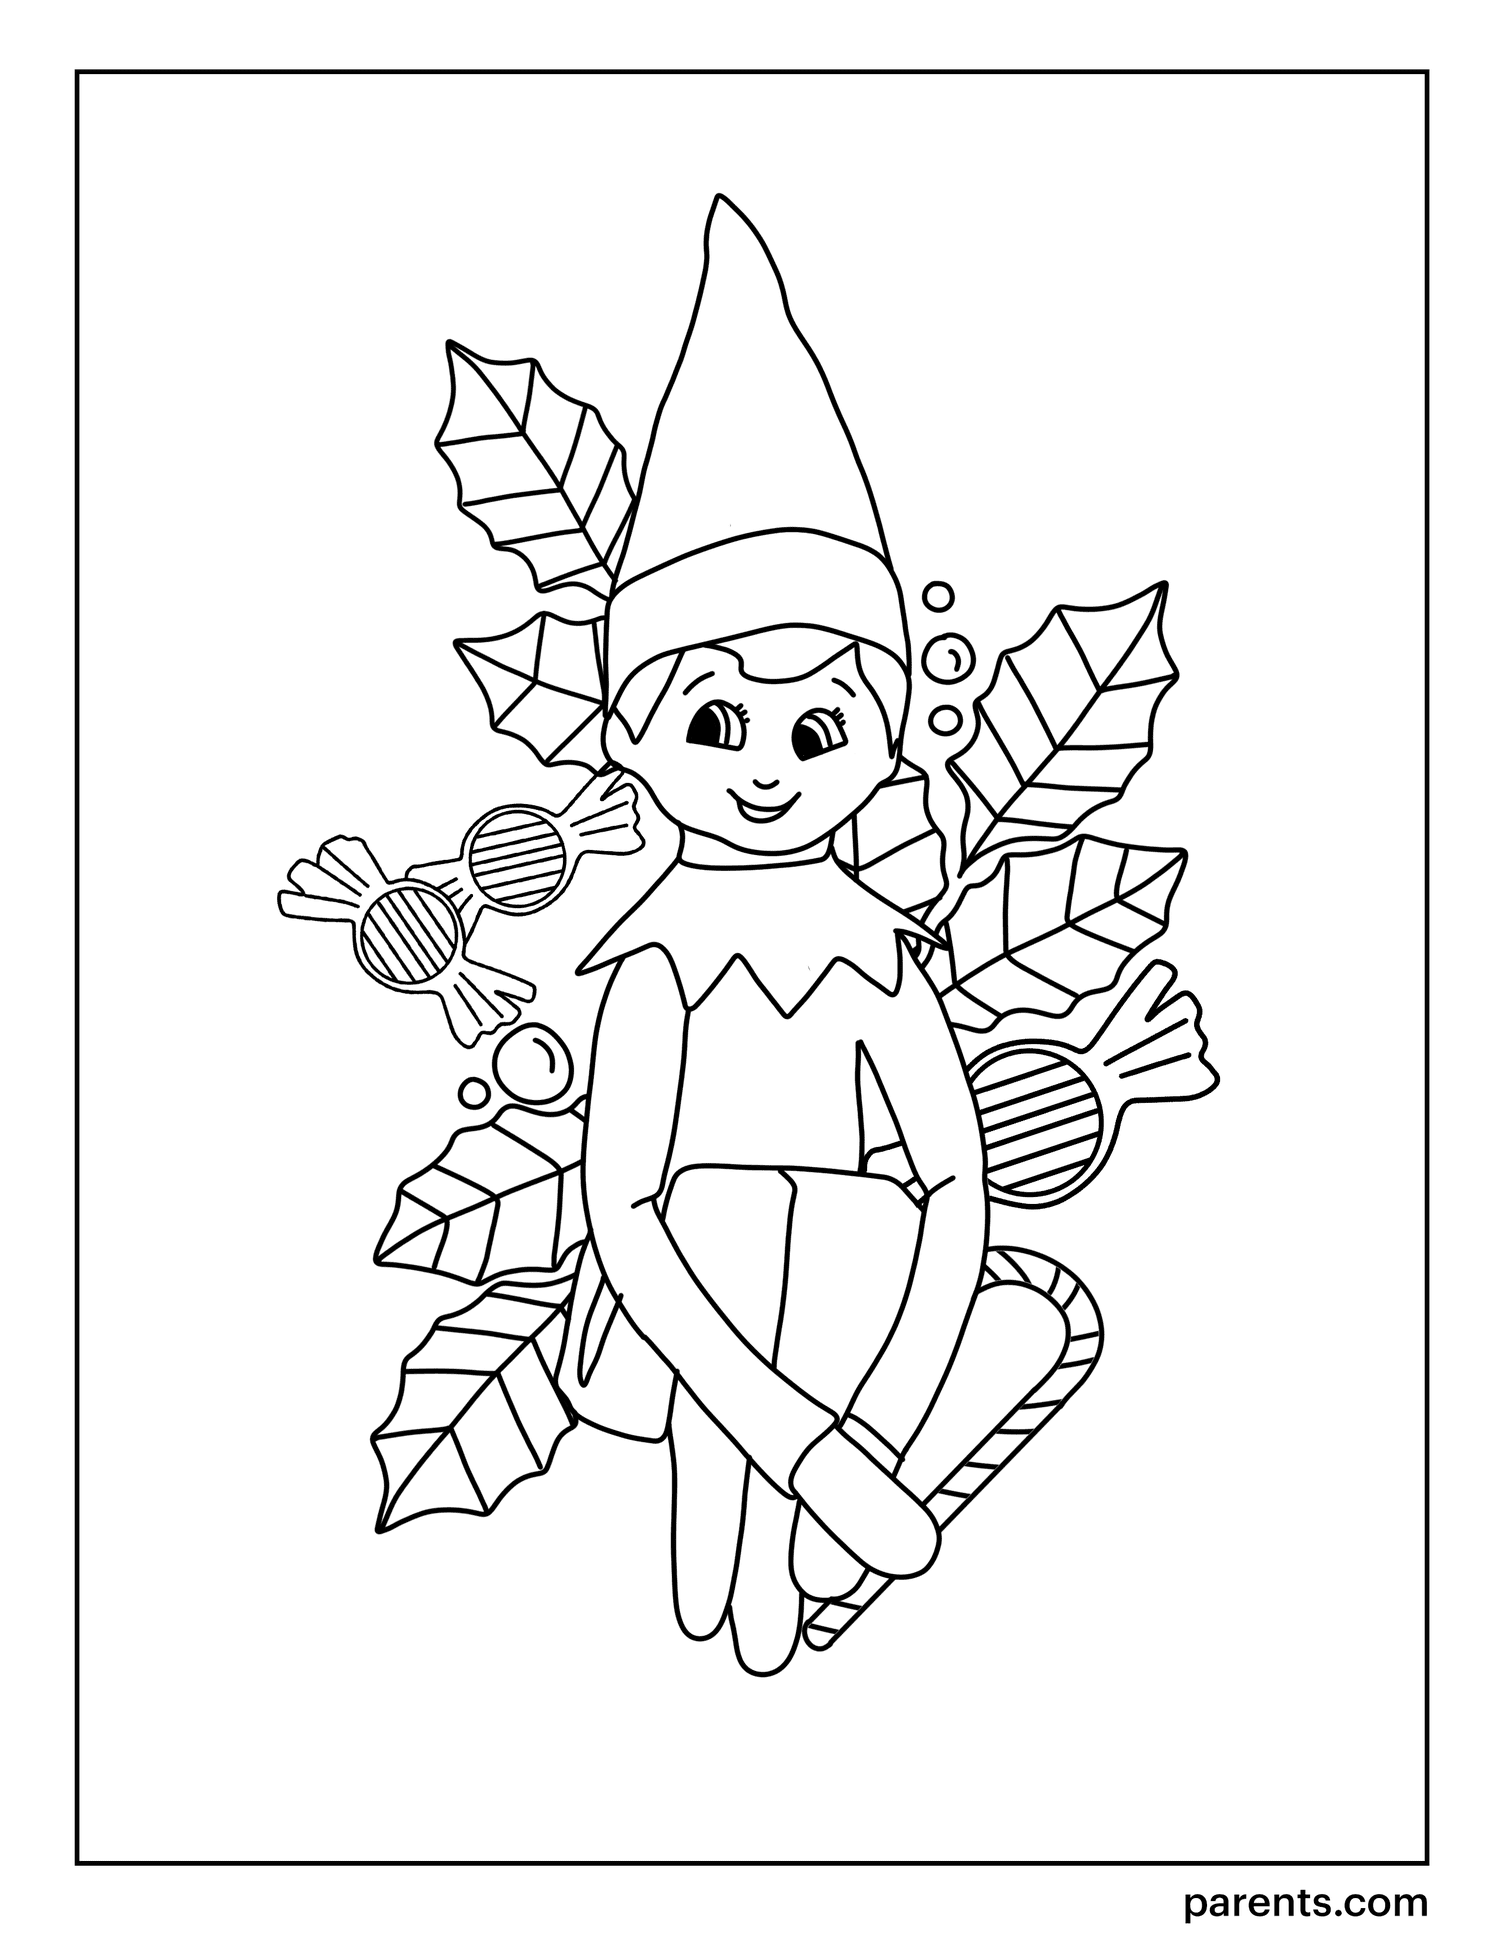 Free Printable Elf On The Shelf Coloring Pages Printable Templates